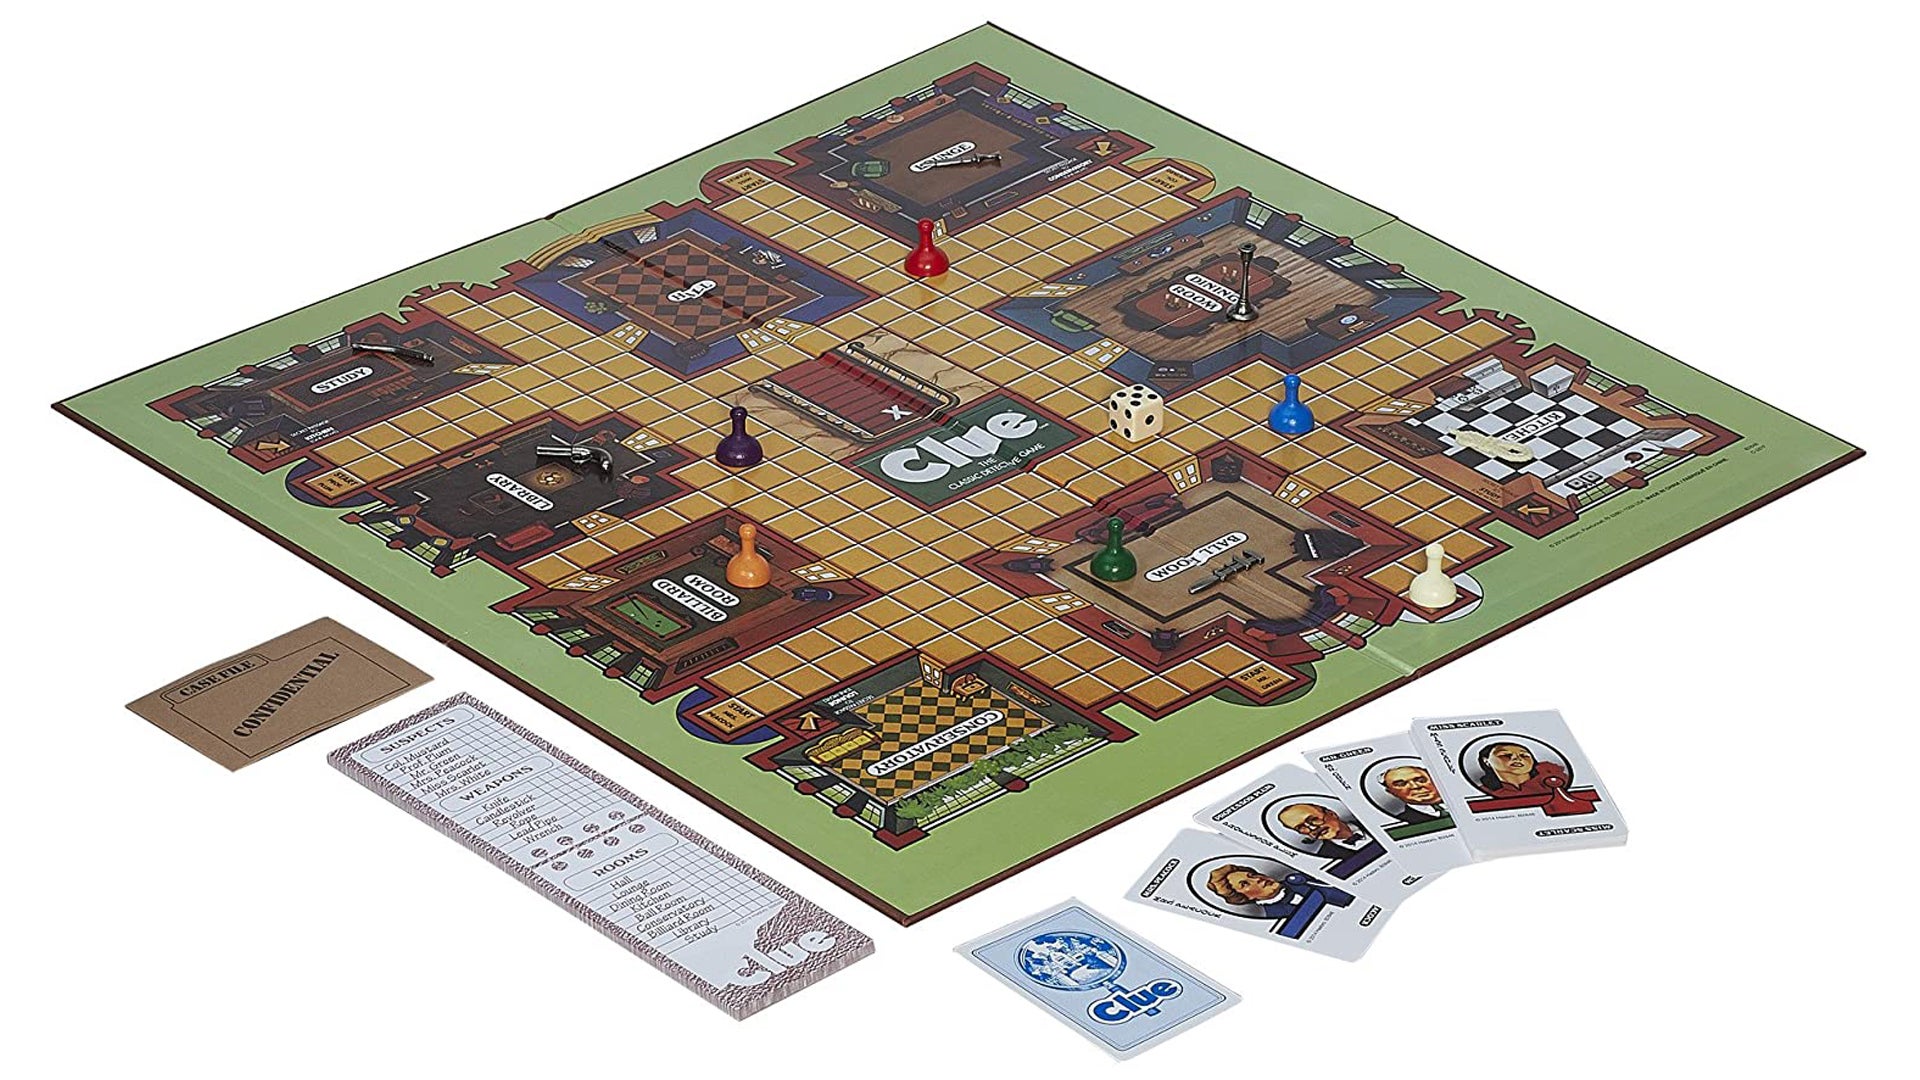 Details about  / THE WALKING DEAD CLUEDO BOARD GAME BRAND NEW 18 2-6 PLAYERS ENGLISH VERSION